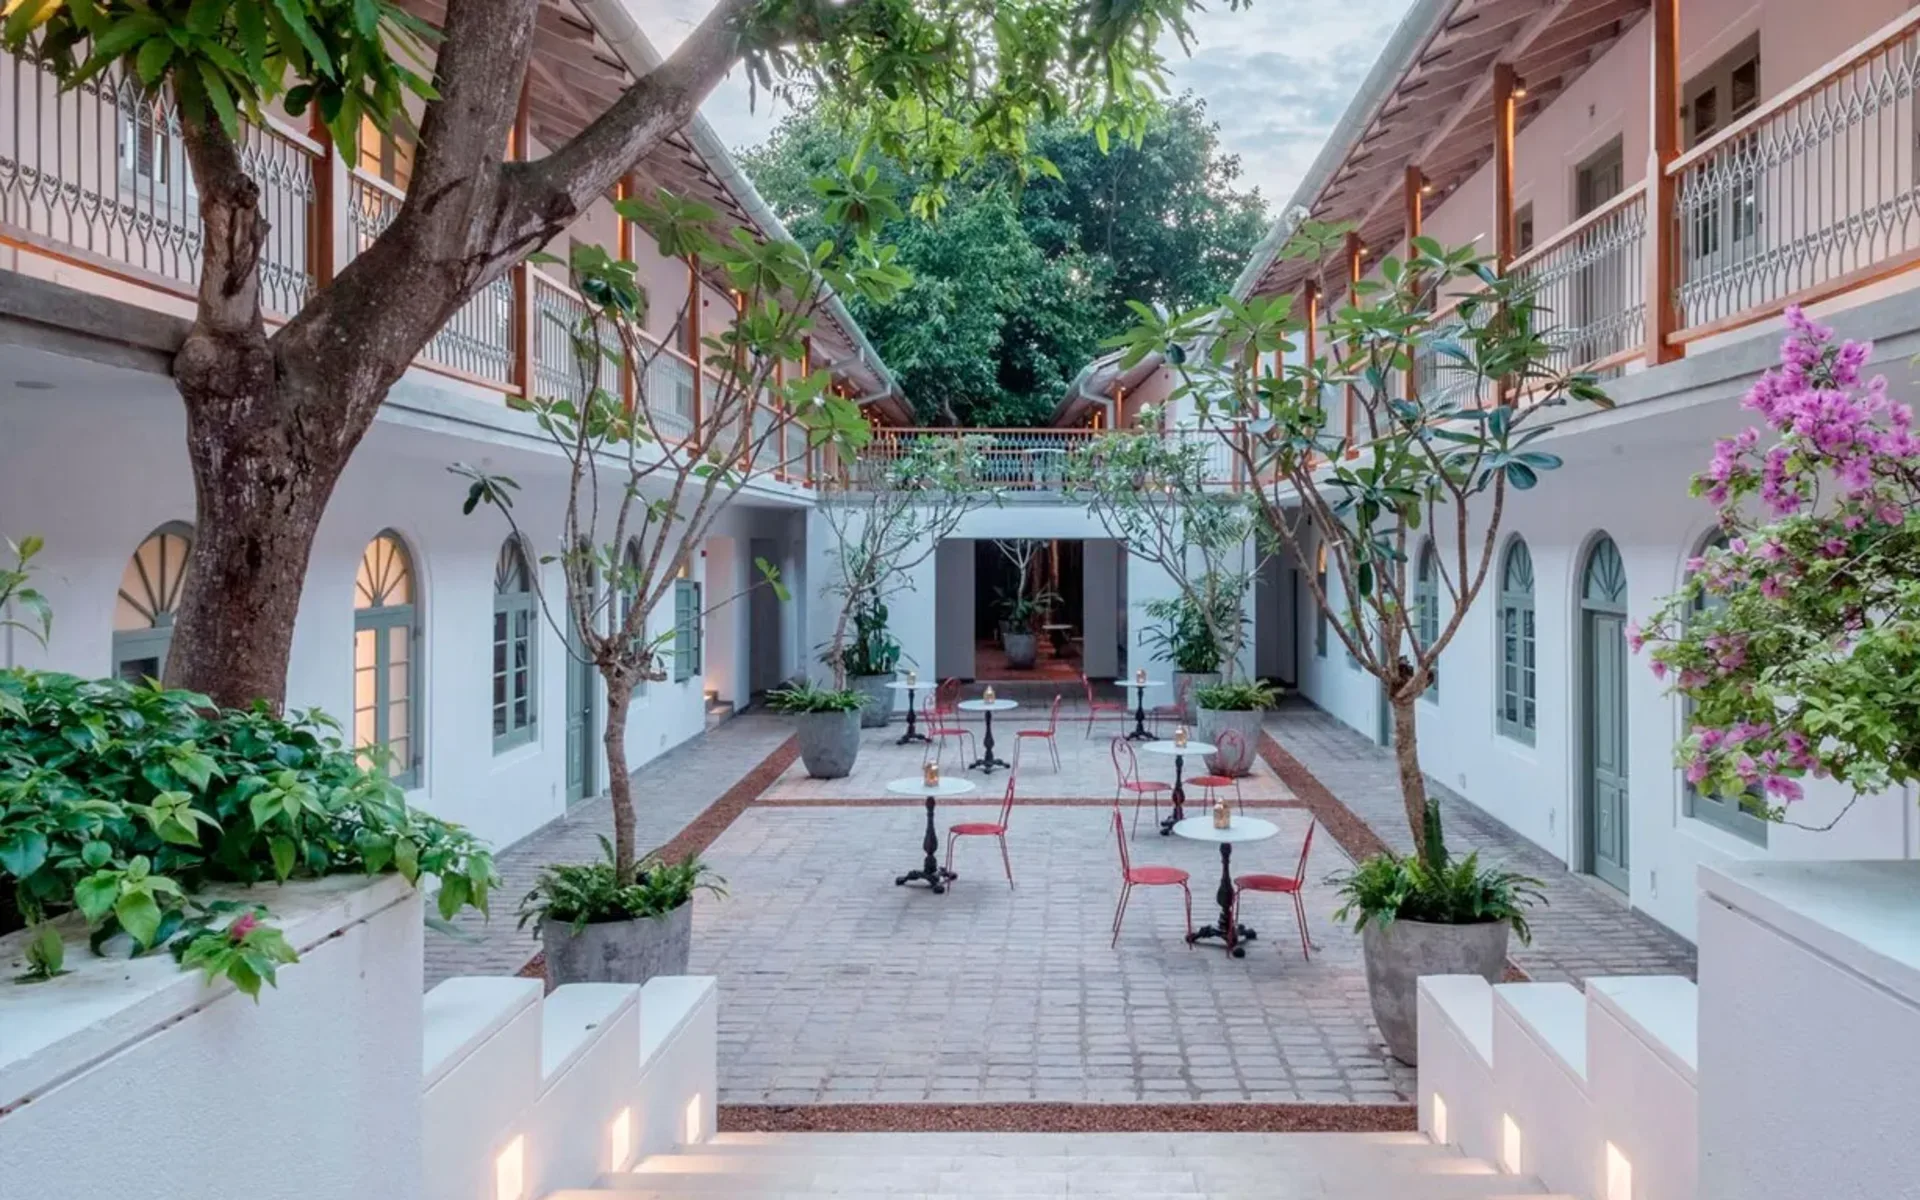 The courtyard at Fort Bazaar is draped in stone paving and decorated with a range of plants